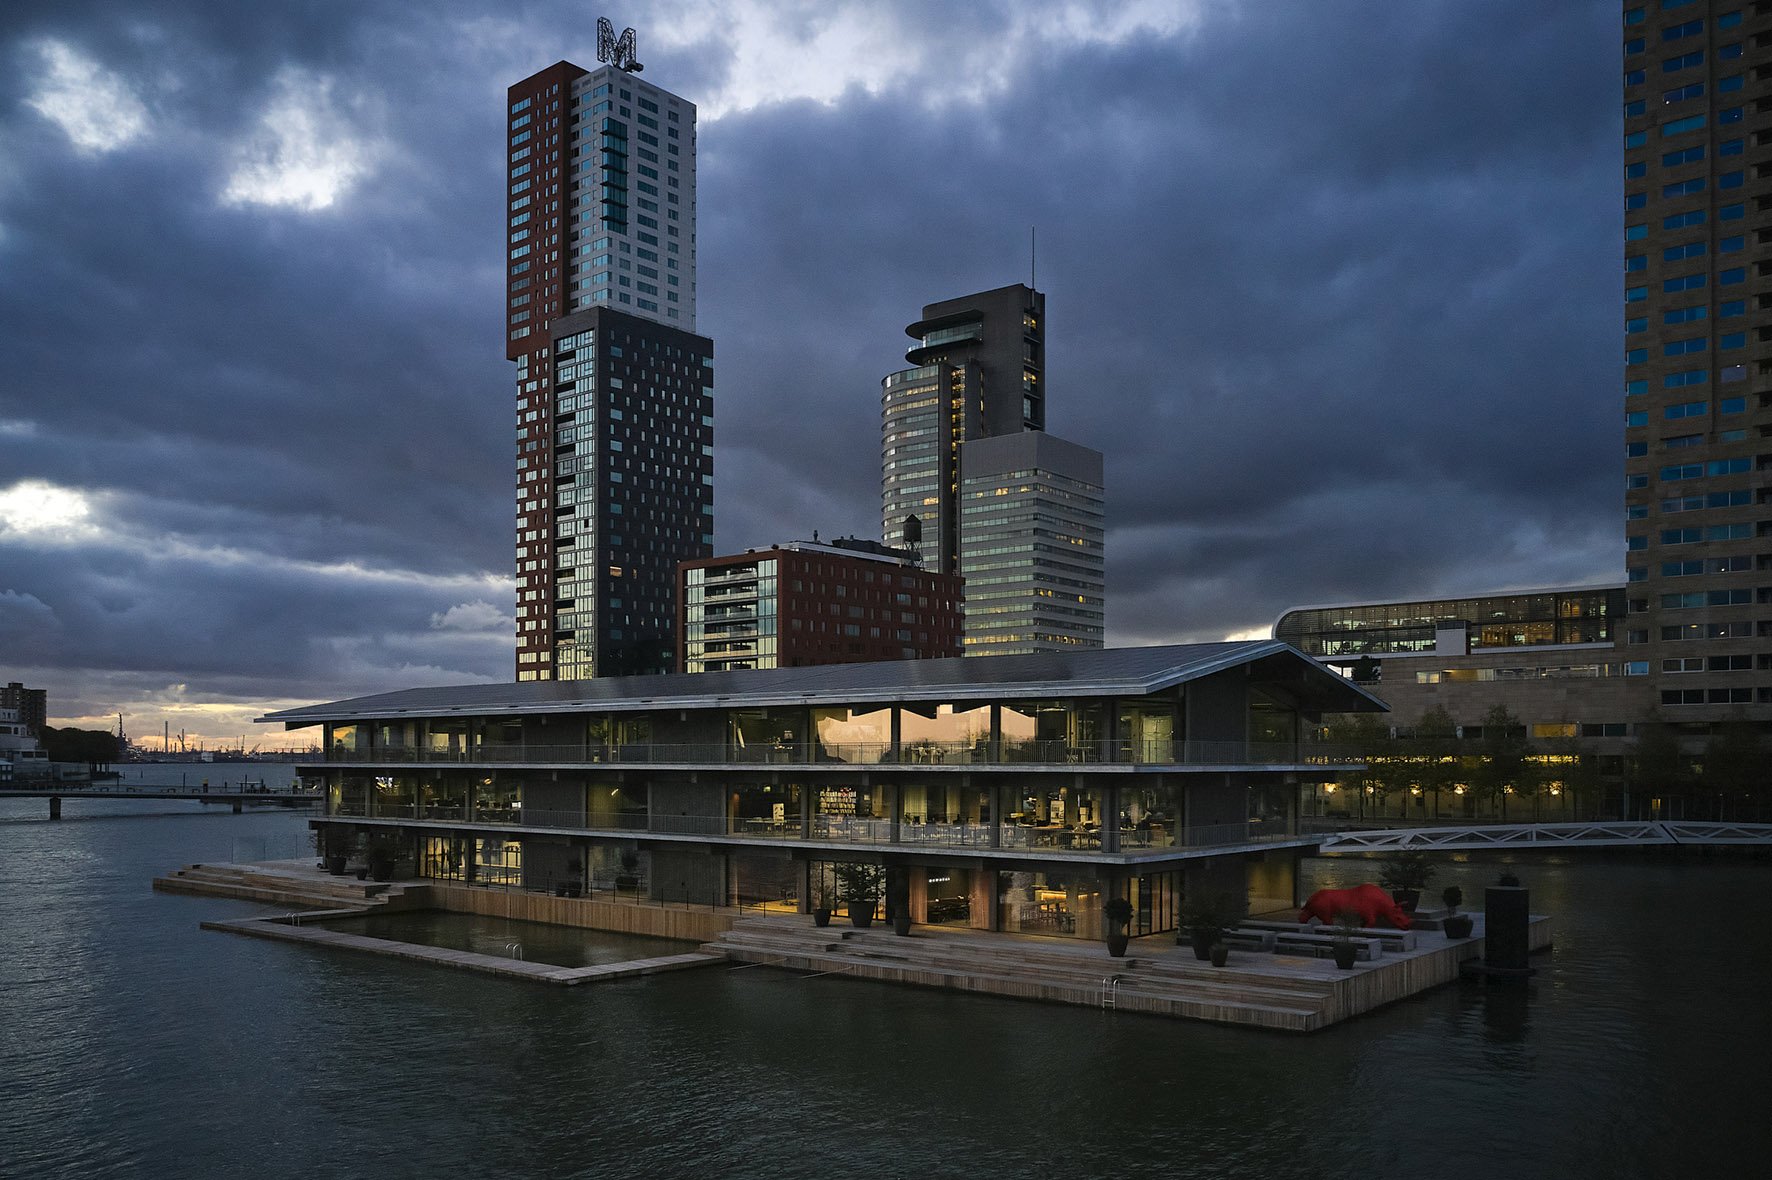 Floating Office Rotterdam, the biggest and most sustainable office in the world